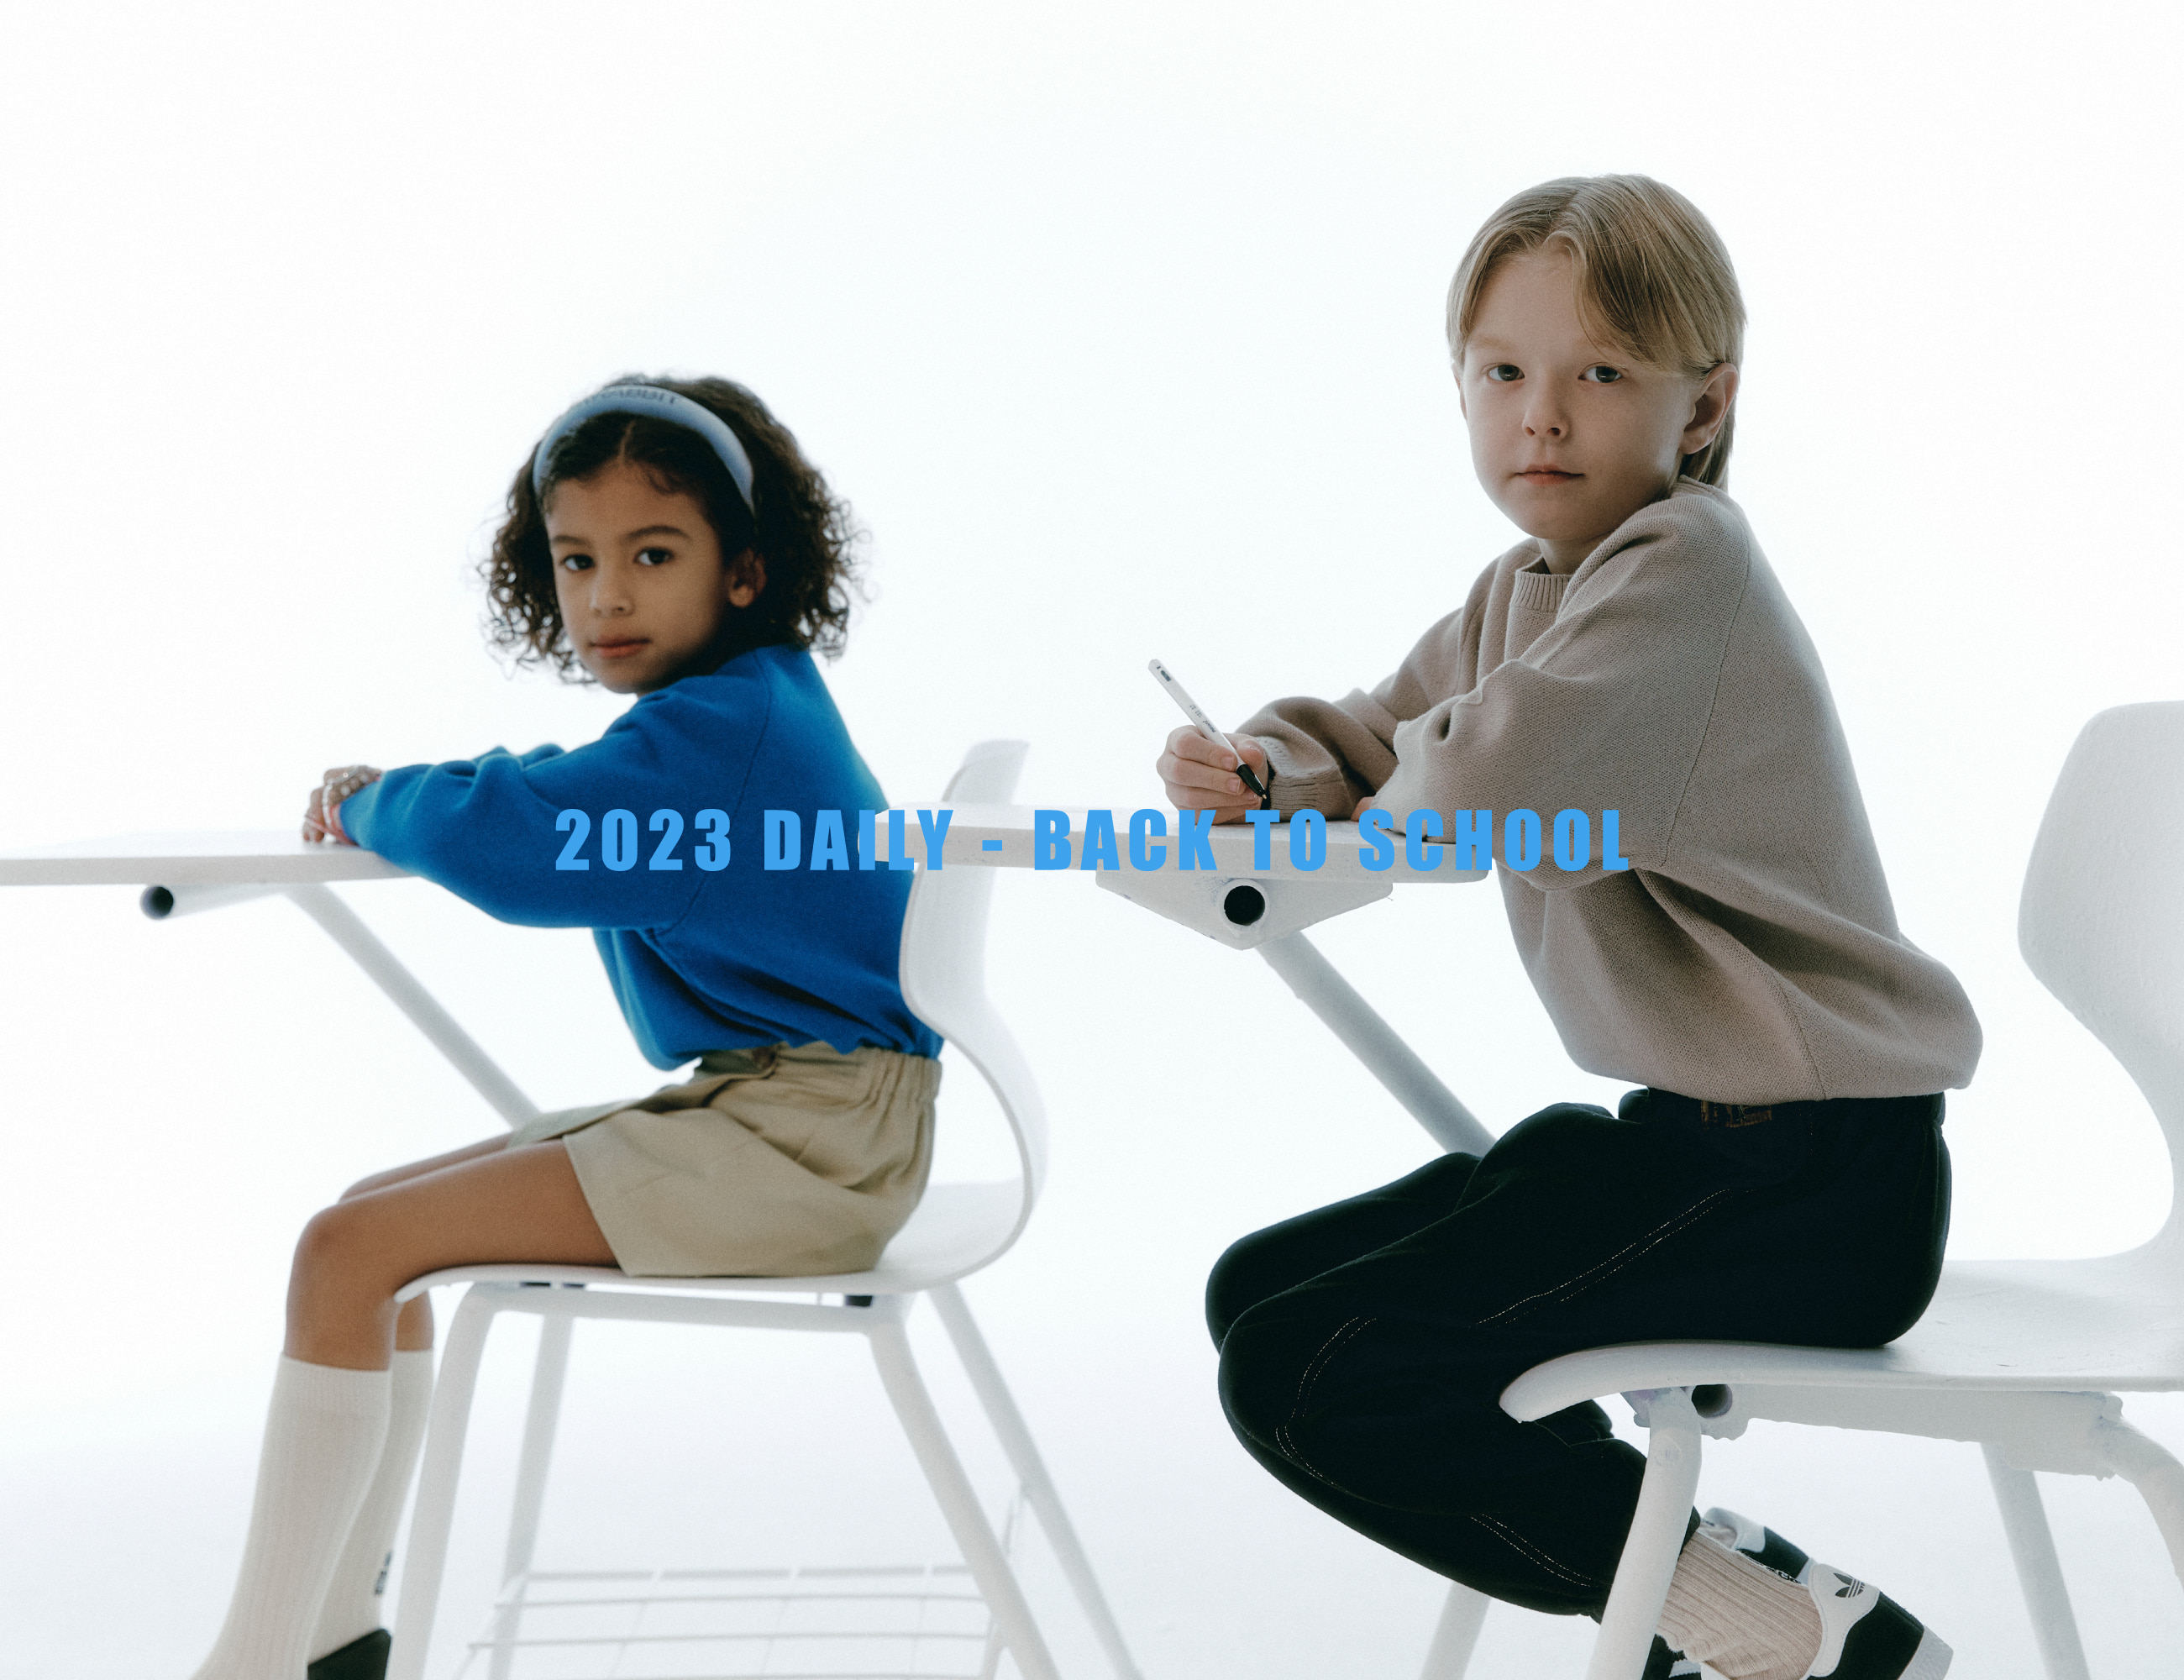 2023 Daily - BACK TO SCHOOL